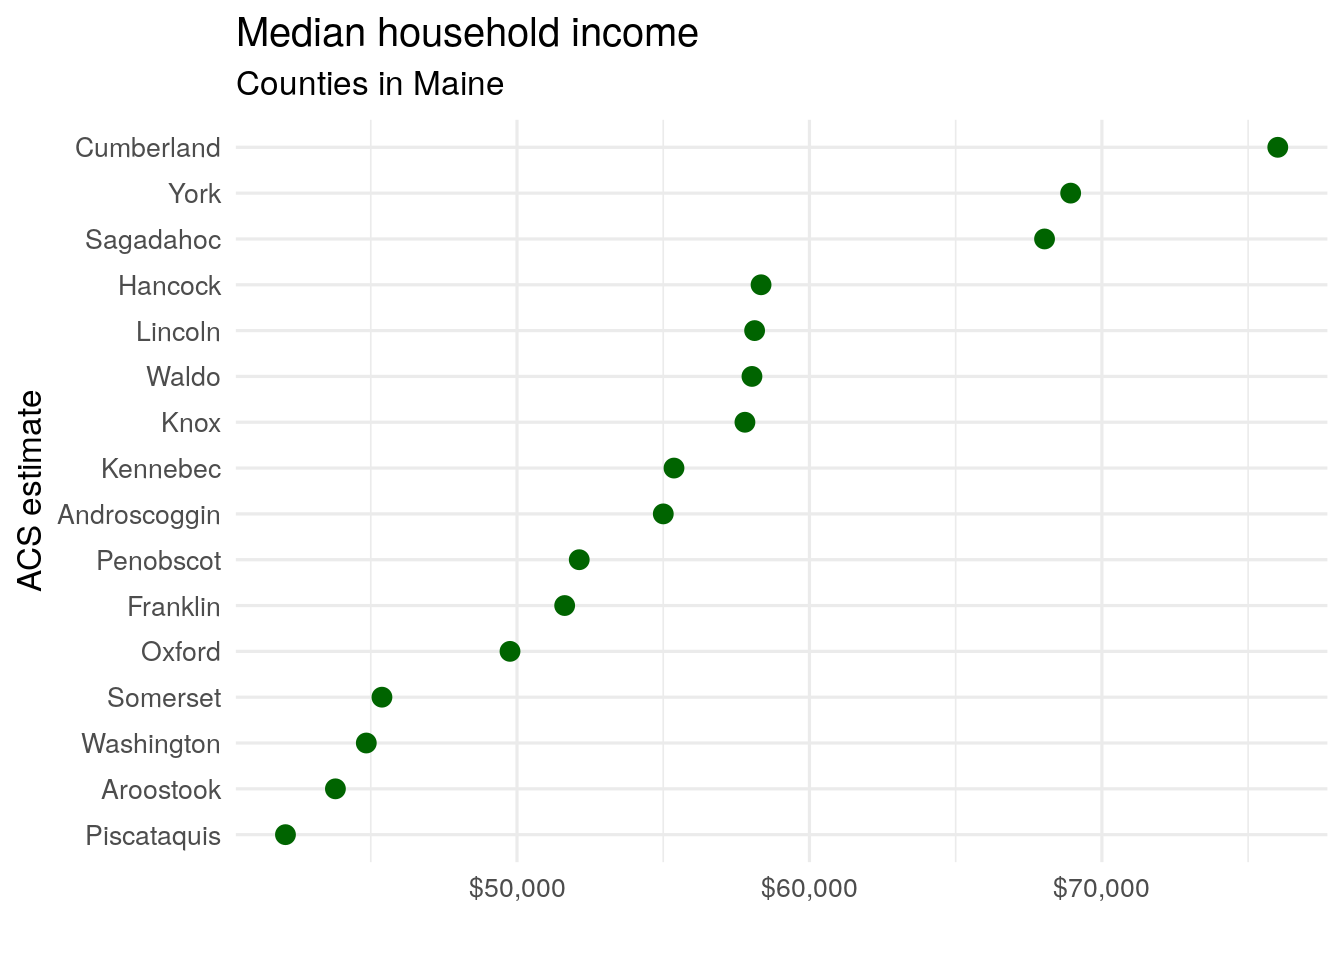 A dot plot of median household income by county in Maine